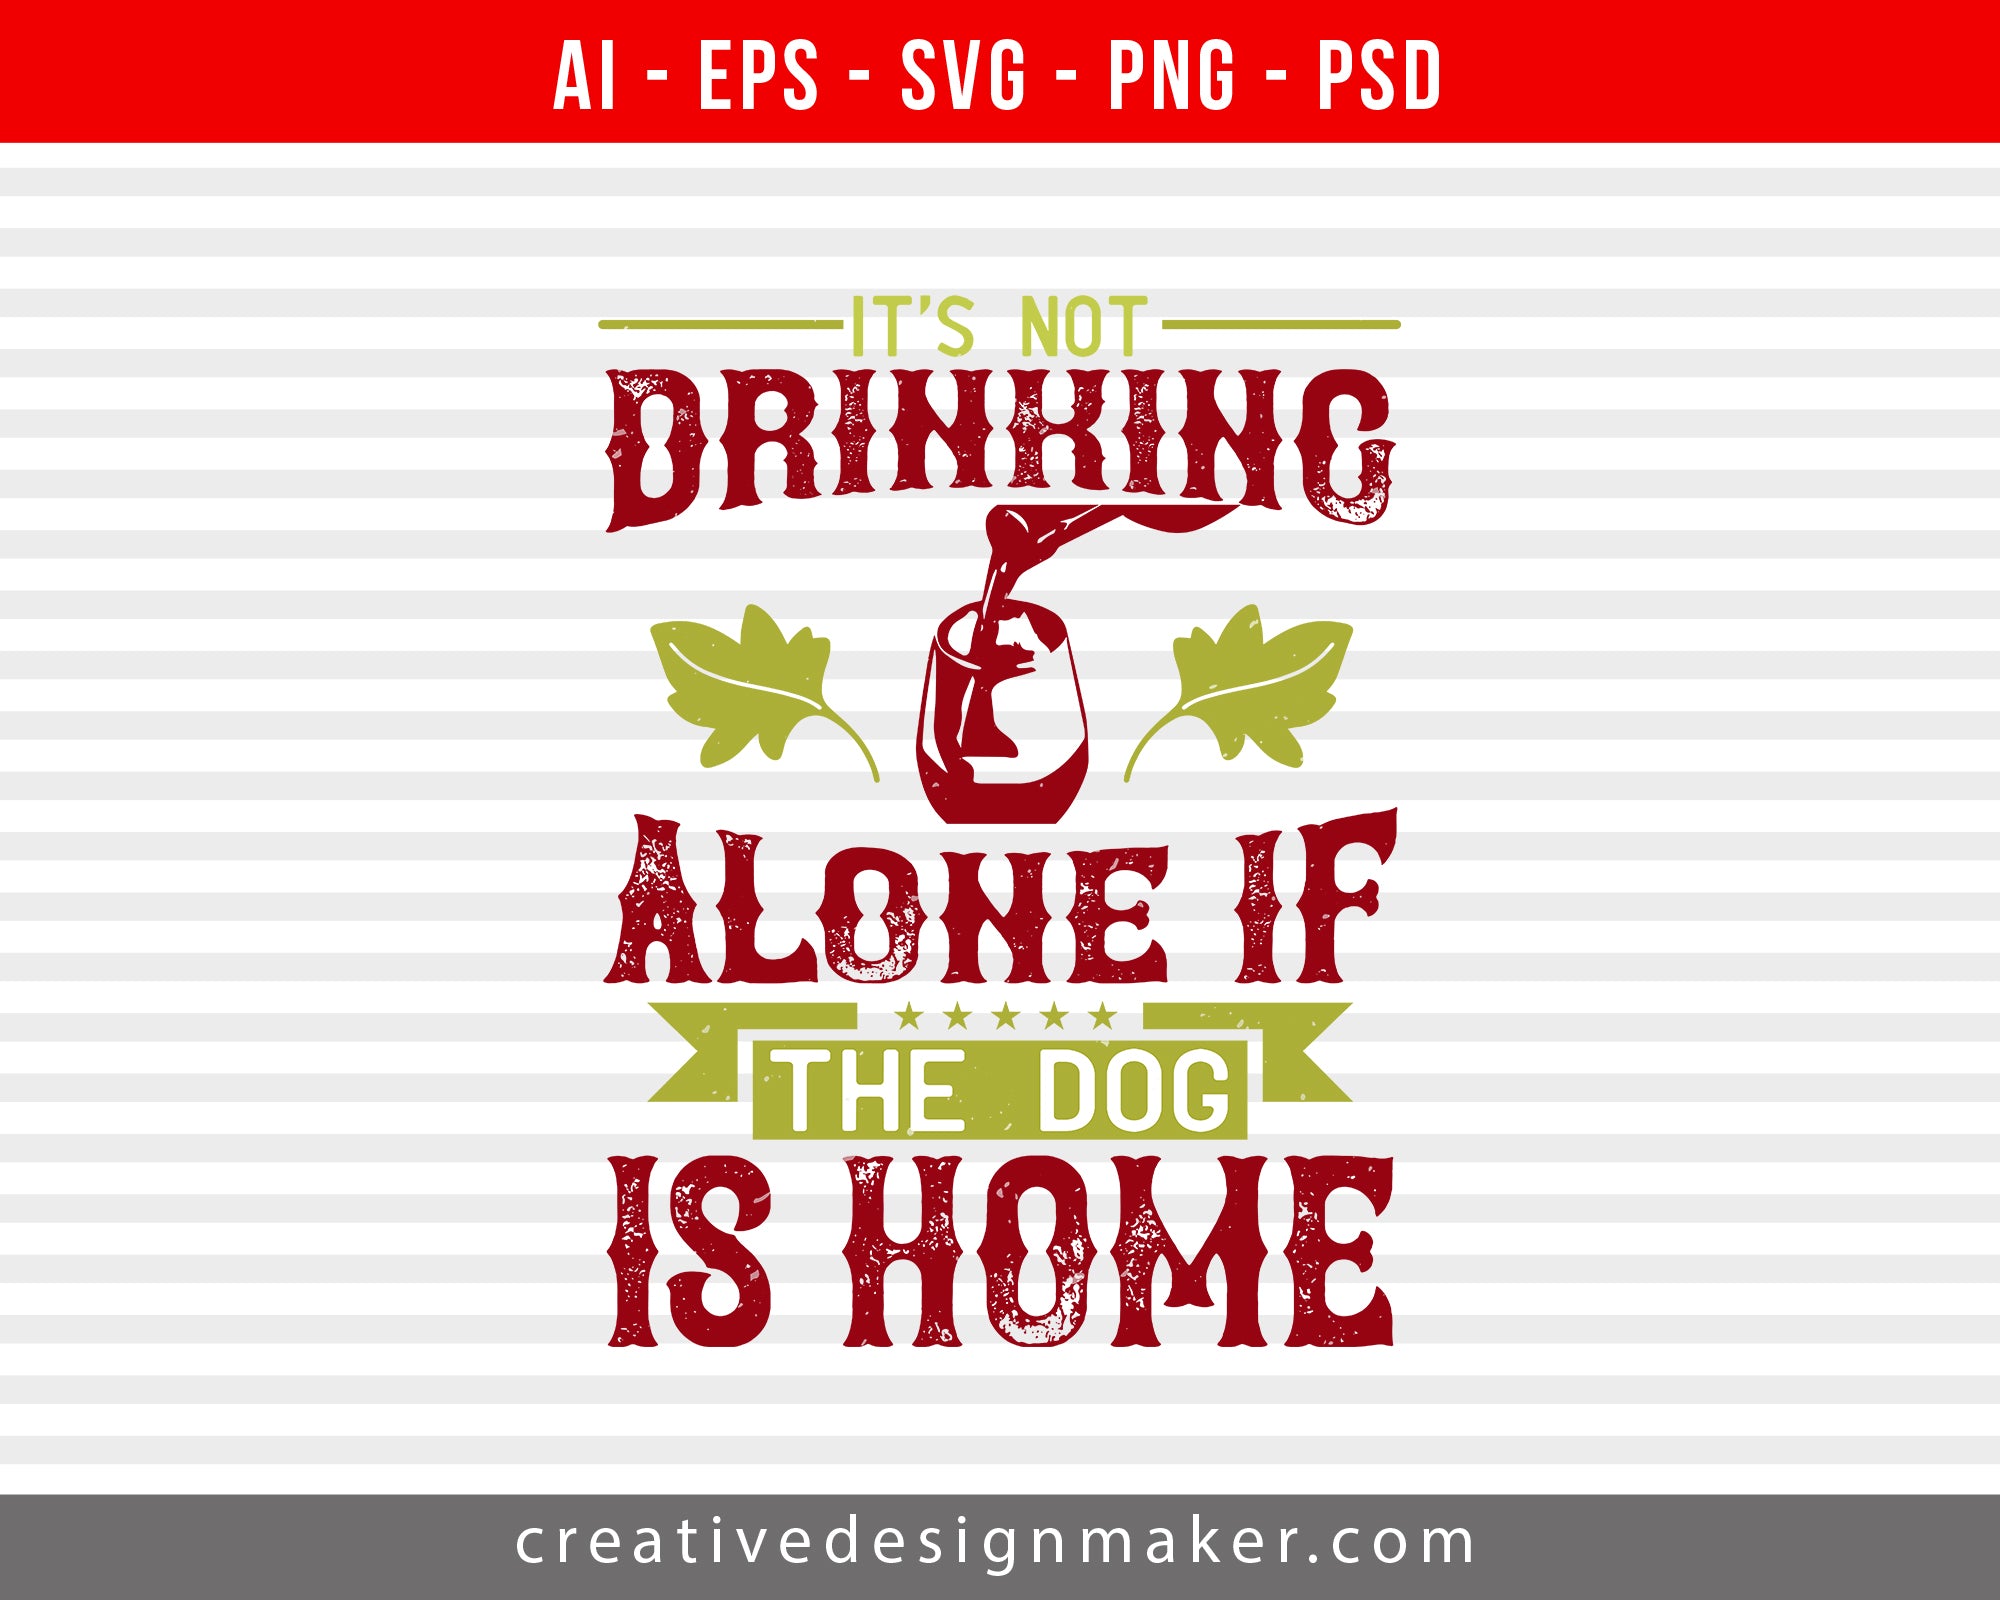 It’s not drinking alone if the dog is home Wine Print Ready Editable T-Shirt SVG Design!